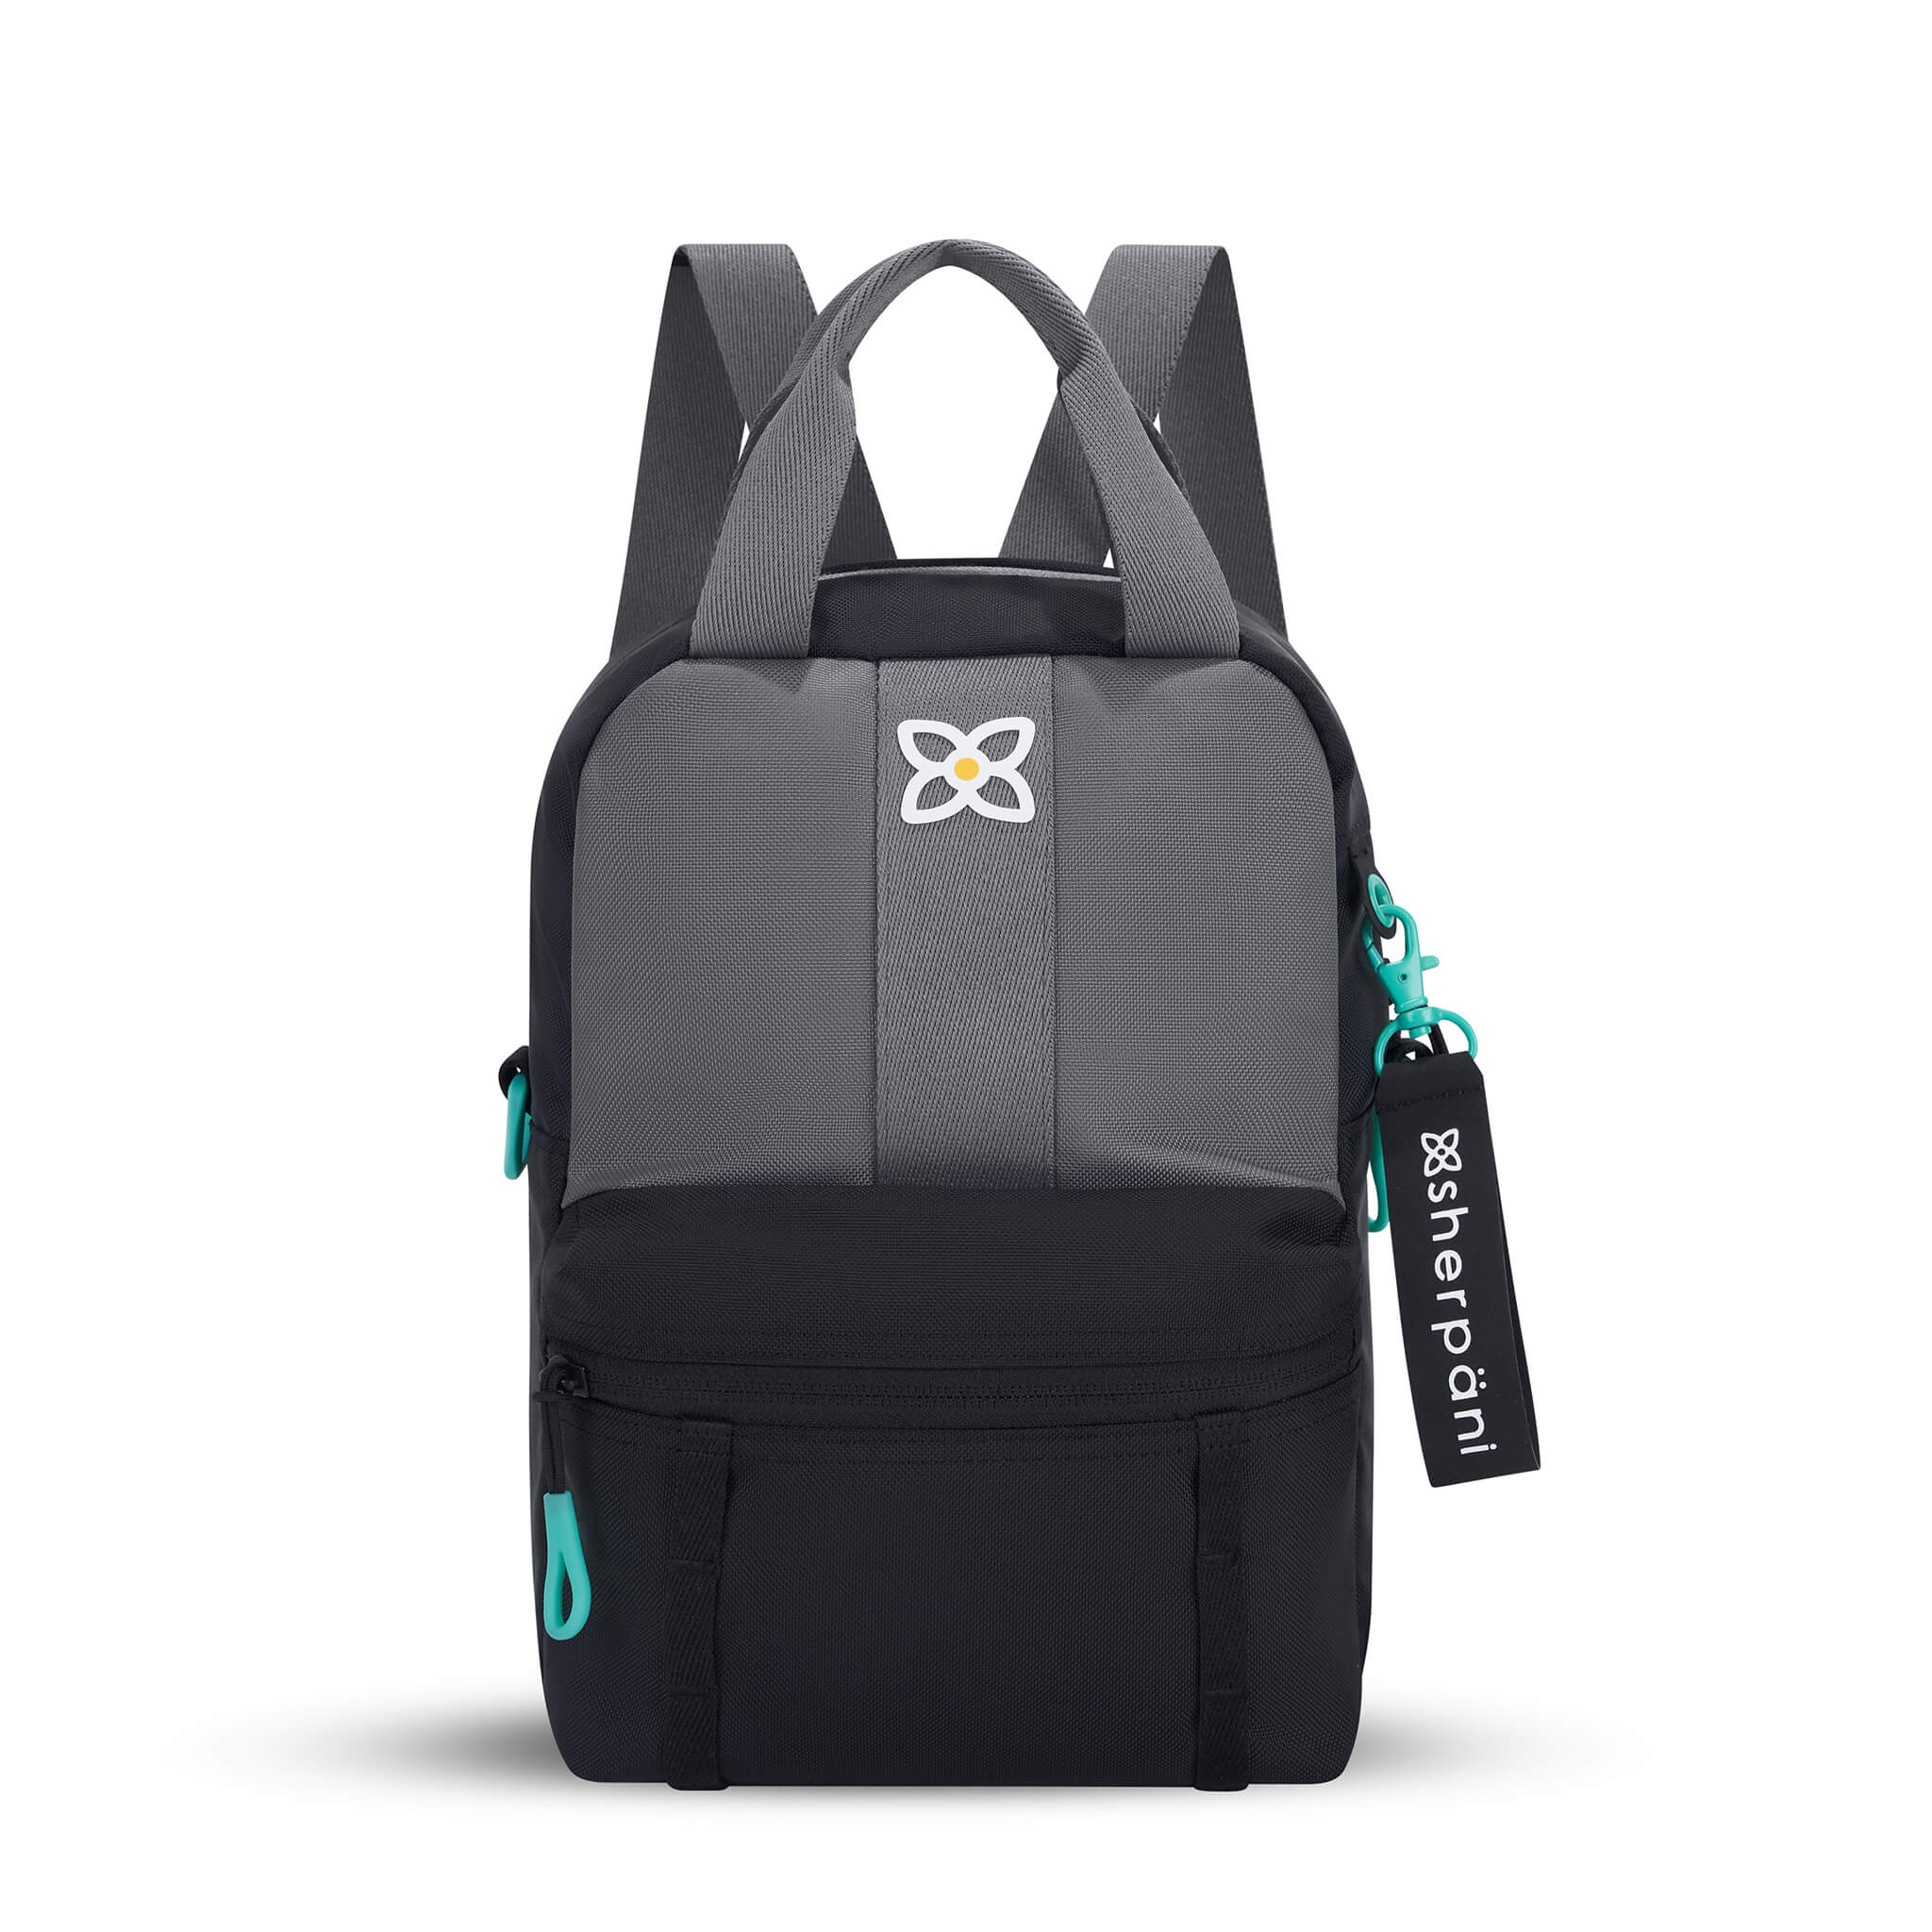 Flat front view of Sherpani mini backpack the Logan in Moonstone. The bag is black and gray with aqua accents. The Logan has fixed tote handles and adjustable backpack straps. 